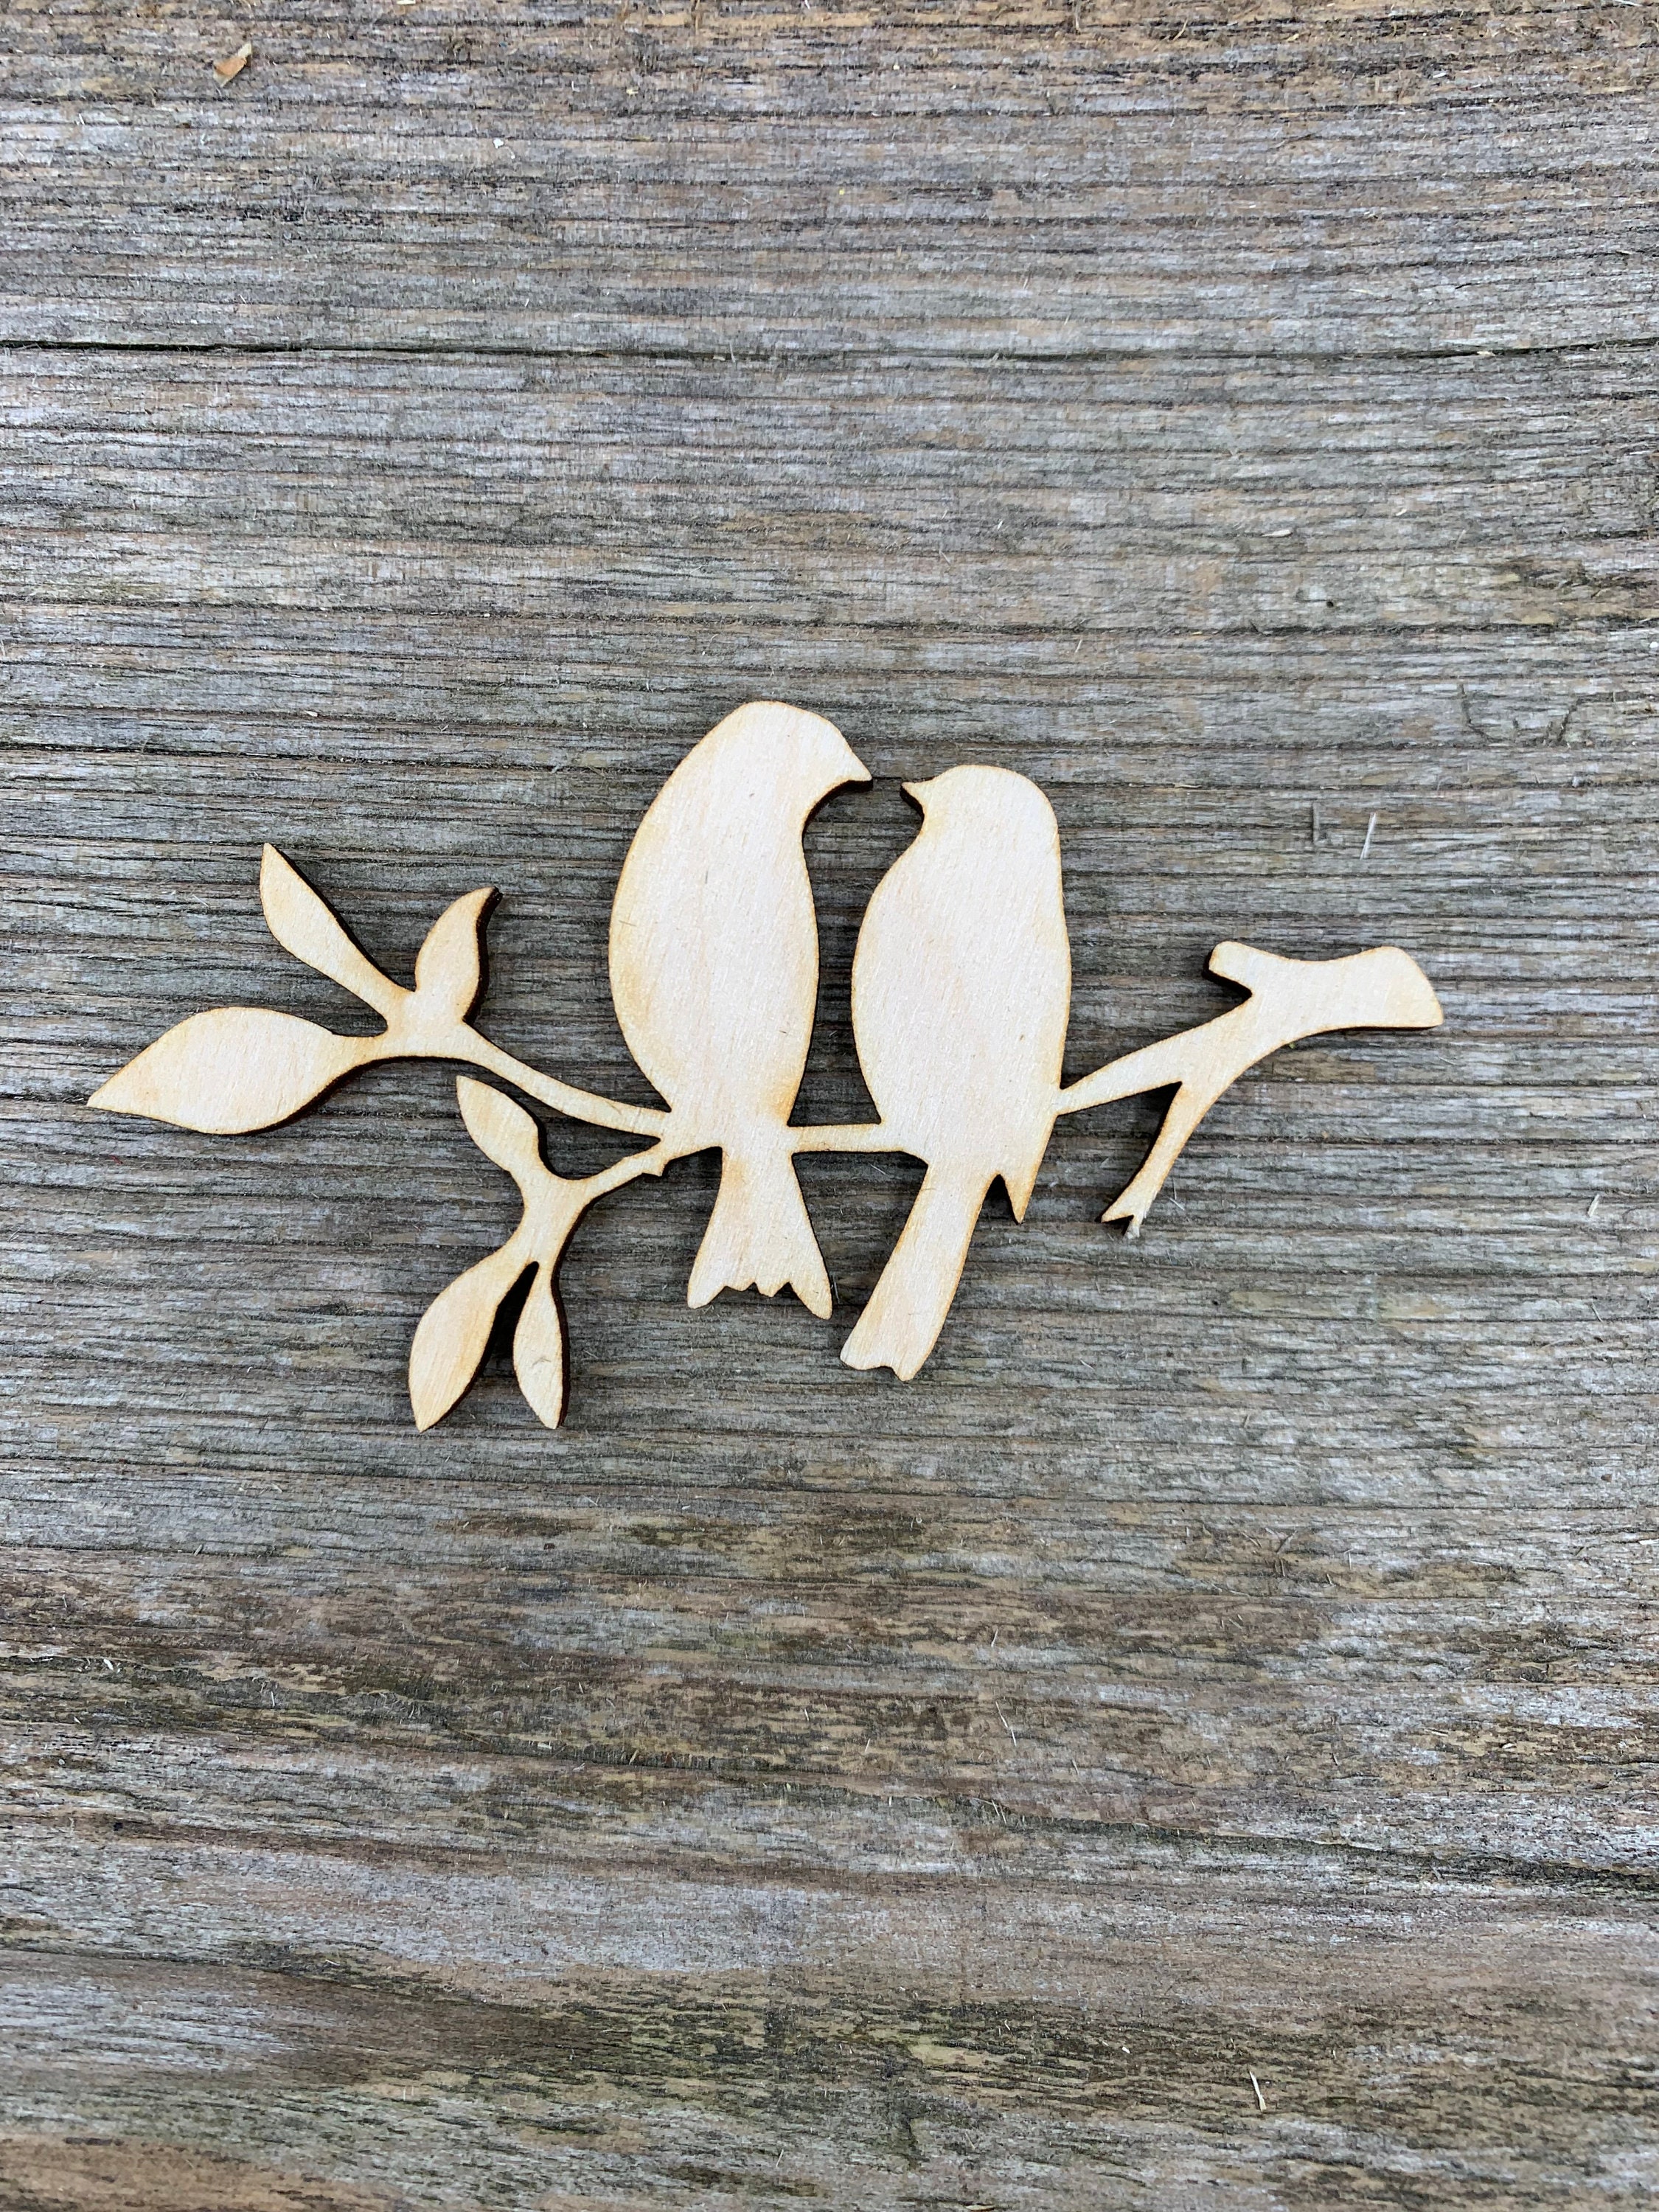 10x Wooden Simple Dove Flying Plain Craft Shapes 3mm Plywood Peace an Love  Bird 